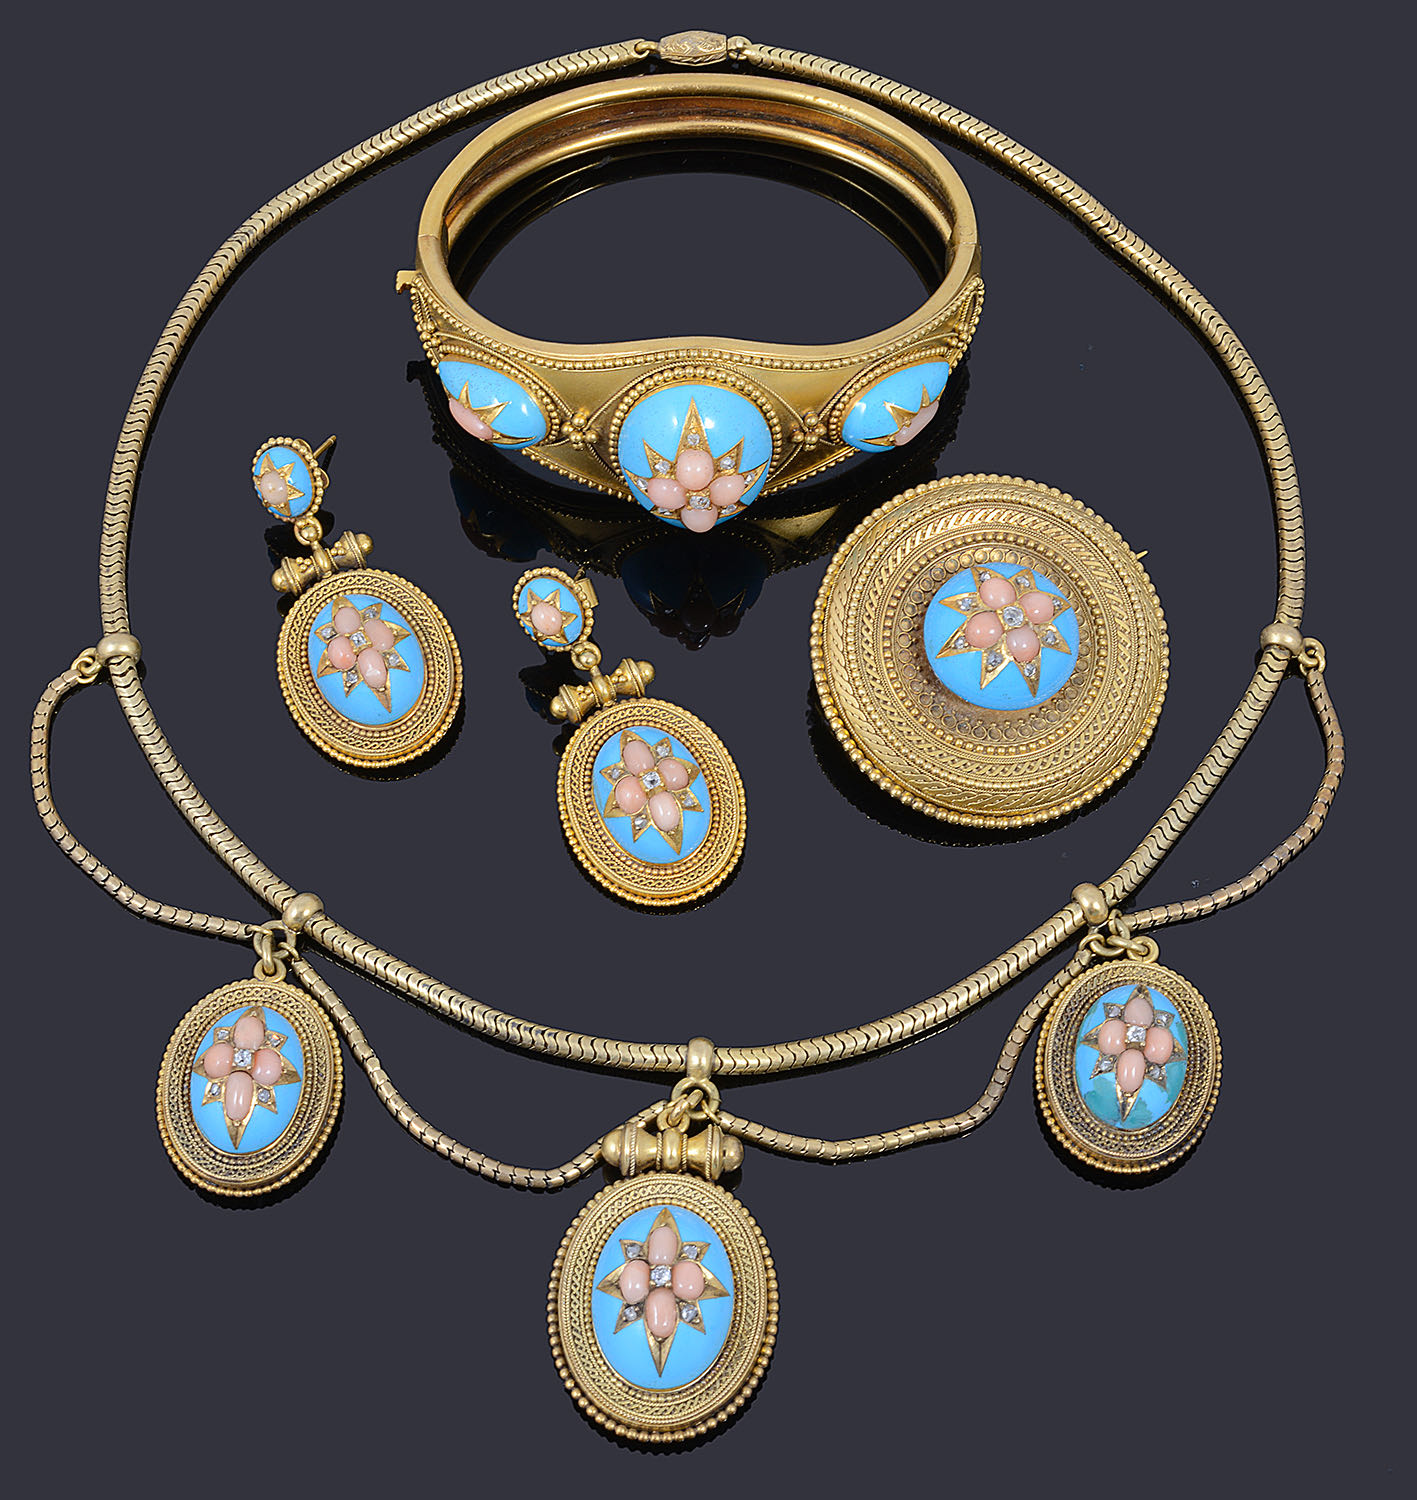 An exquisite mid-Victorian gold, diamond, coral and blue enamel suite, circa 1860s